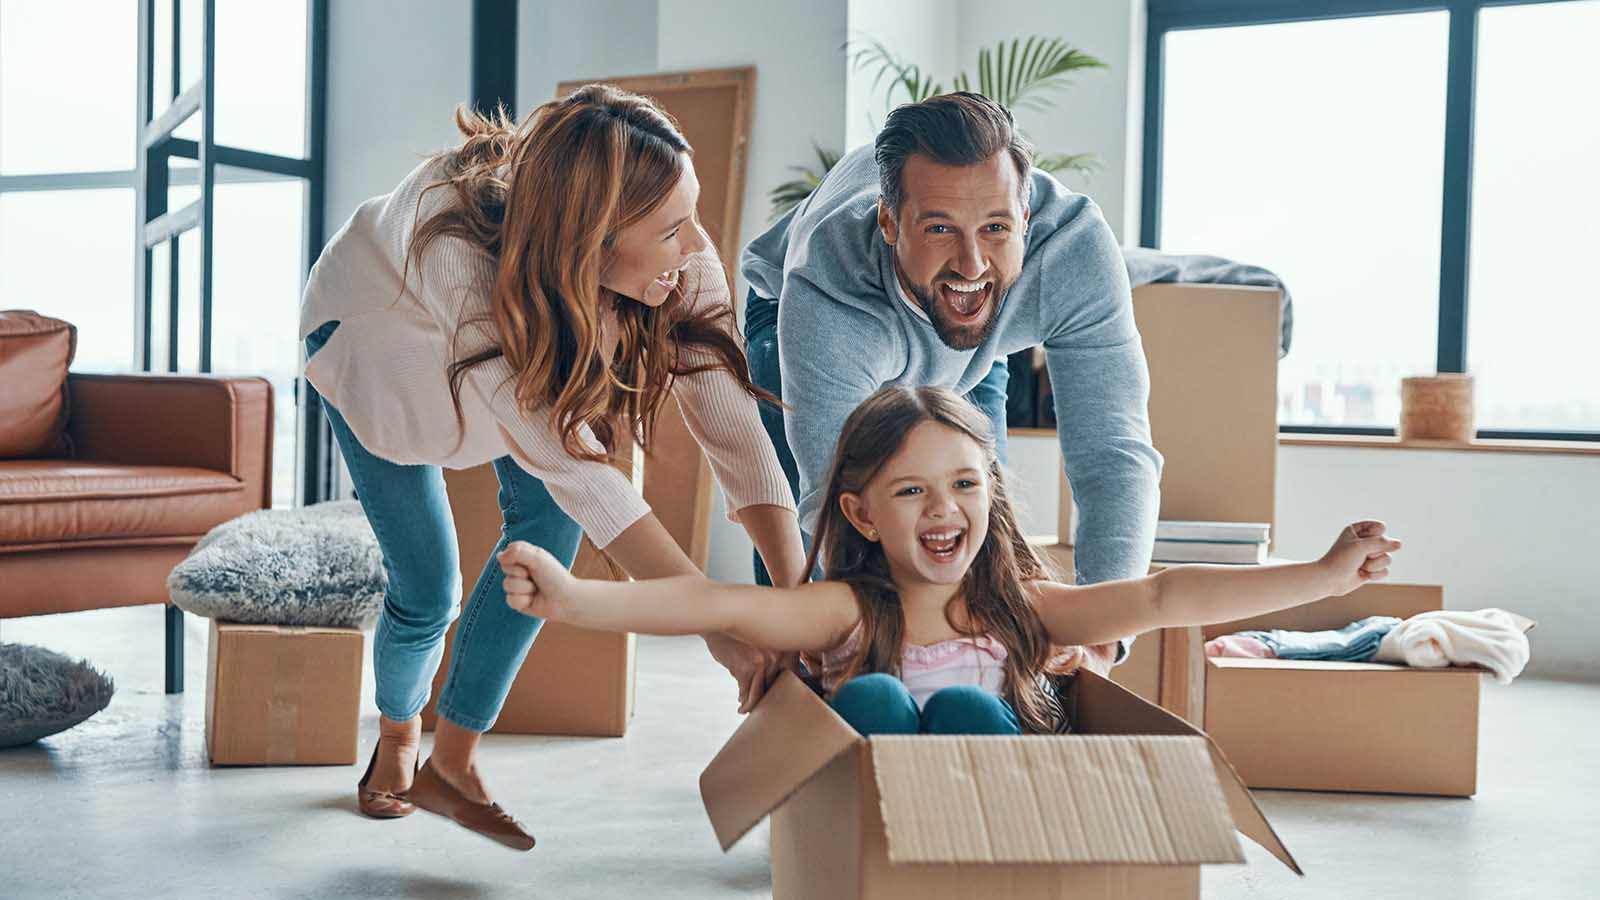 Cheerful young family smiling and unboxing their stuff while moving into a new home.